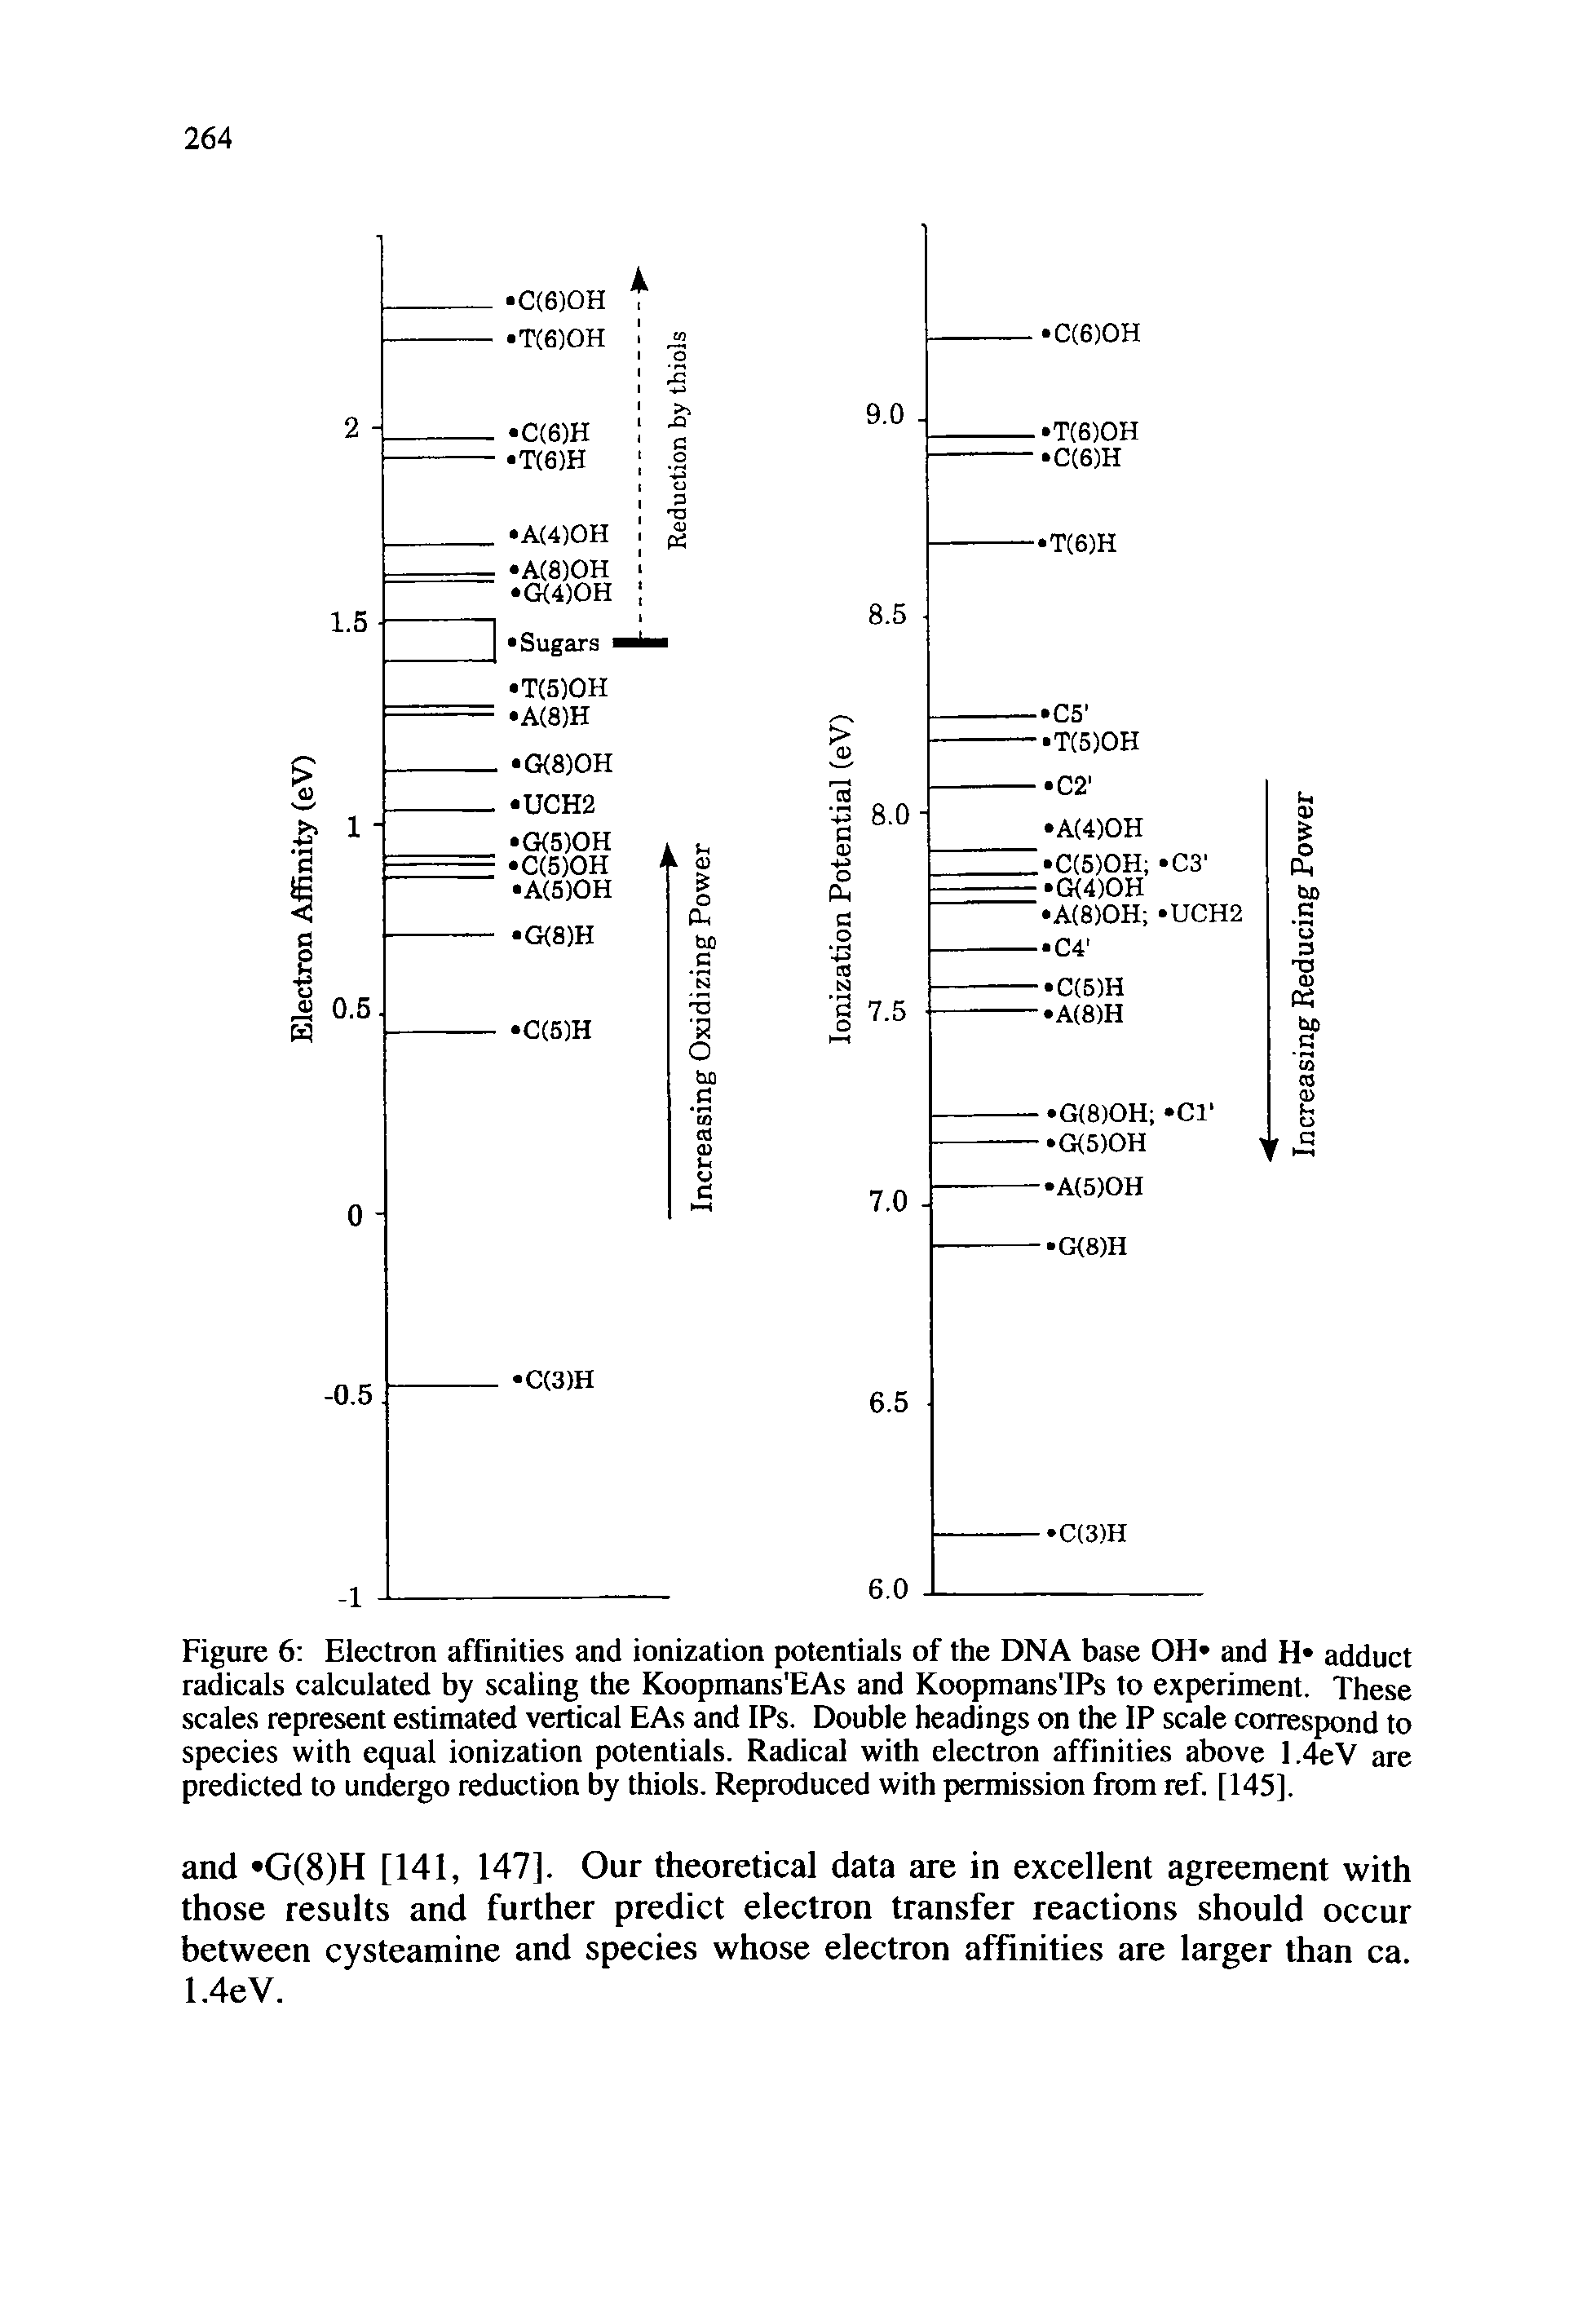 Figure 6 Electron affinities and ionization potentials of the DNA base OH and H adduct radicals calculated by scaling the Koopmans EAs and Koopmans IPs to experiment. These scales represent estimated vertical EAs and IPs. Double headings on the IP scale correspond to species with equal ionization potentials. Radical with electron affinities above 1.4eV are predicted to undergo reduction by thiols. Reproduced with piermission from ref. [145].